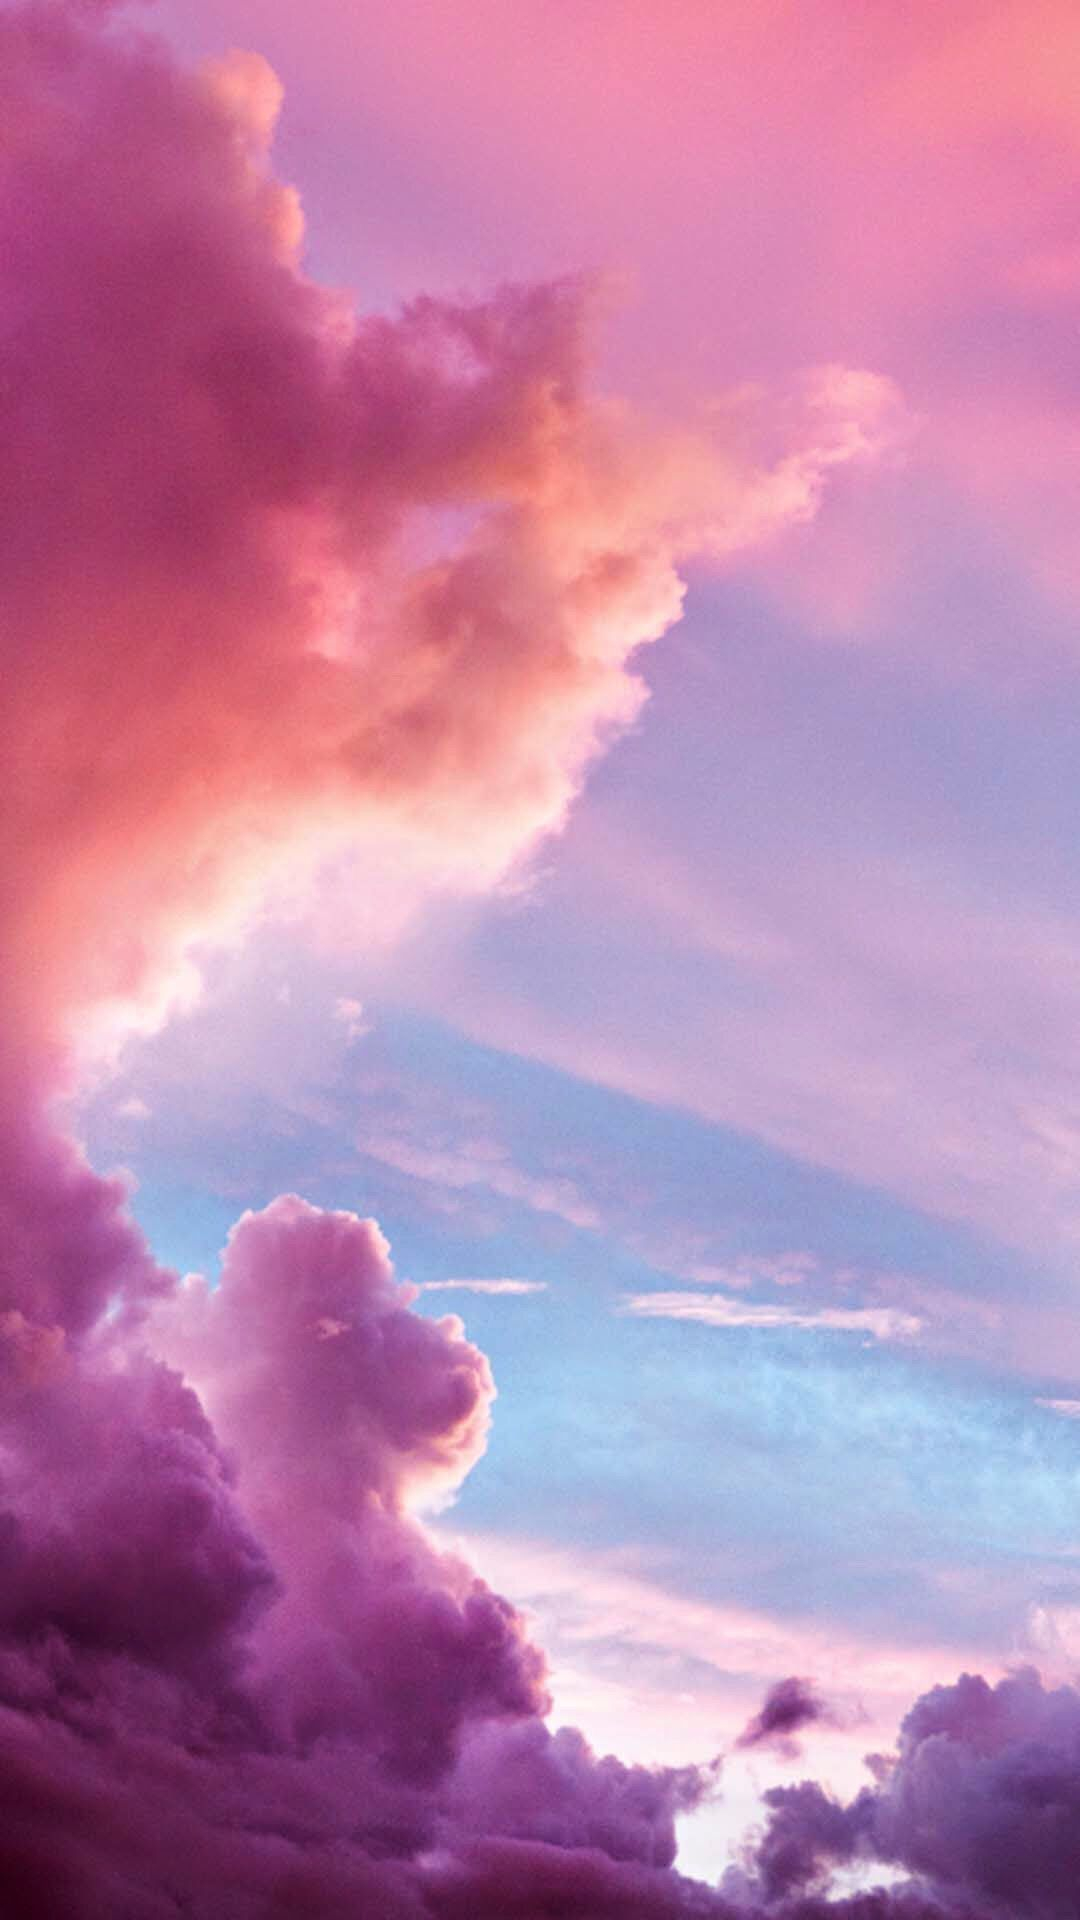 1080x1920 pink and purple ombre | Wallpapers I love! | Purple | Purple ombre wallpaper, Ombre wallpapers, Pink ombre wallpaper